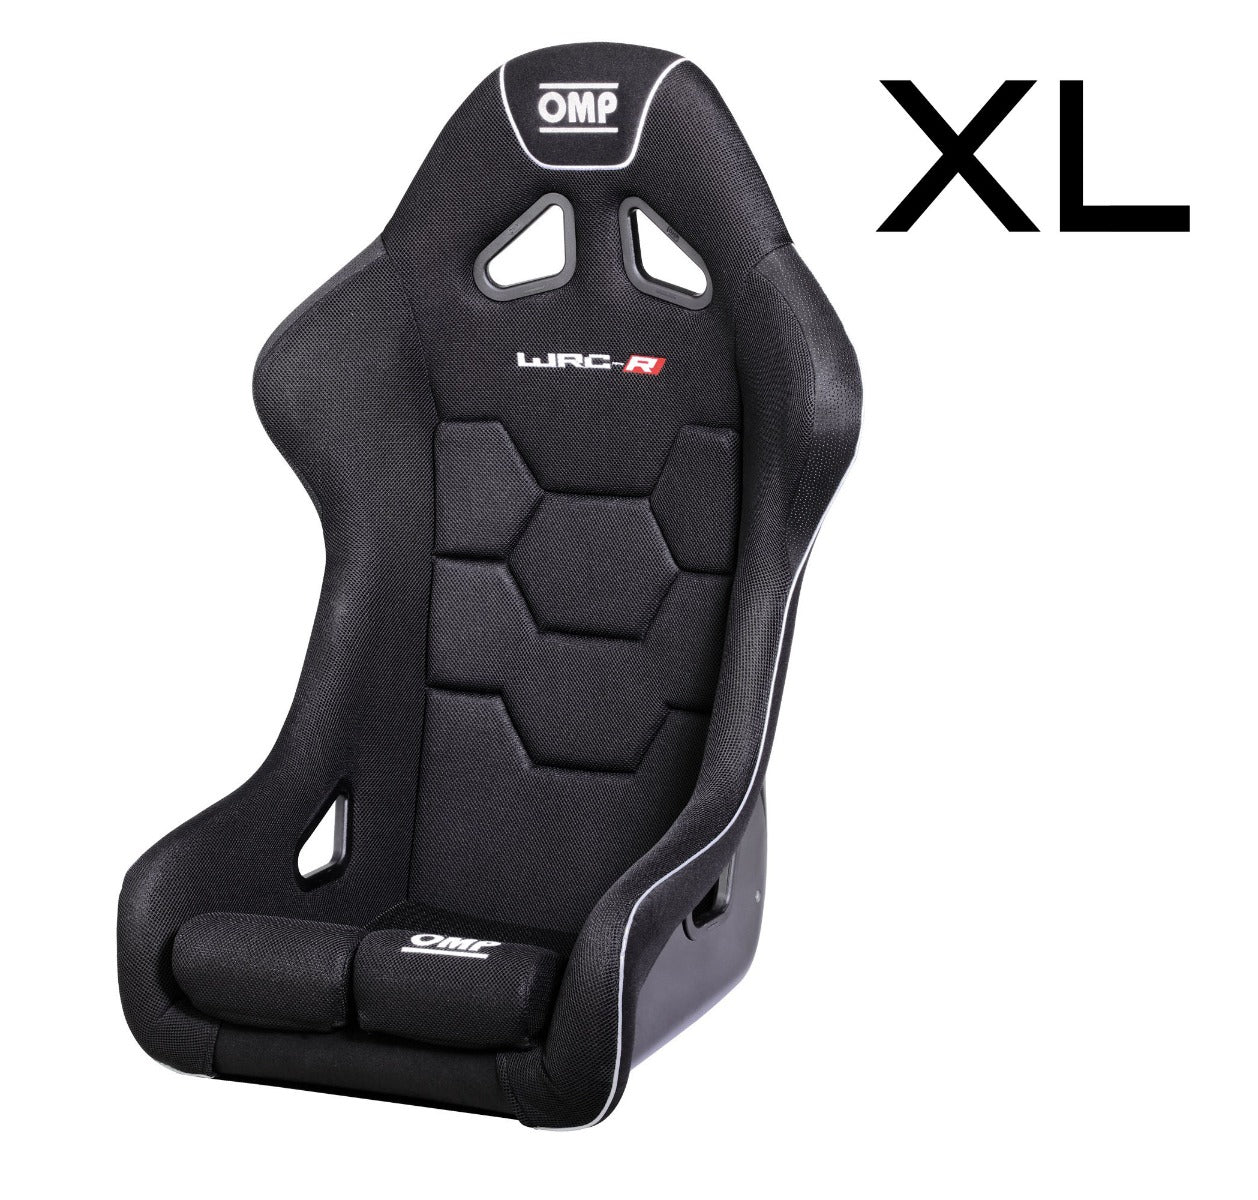 OMP WRC-R Racing Seat Best Deal with the lowest price when on sale with a discount XL